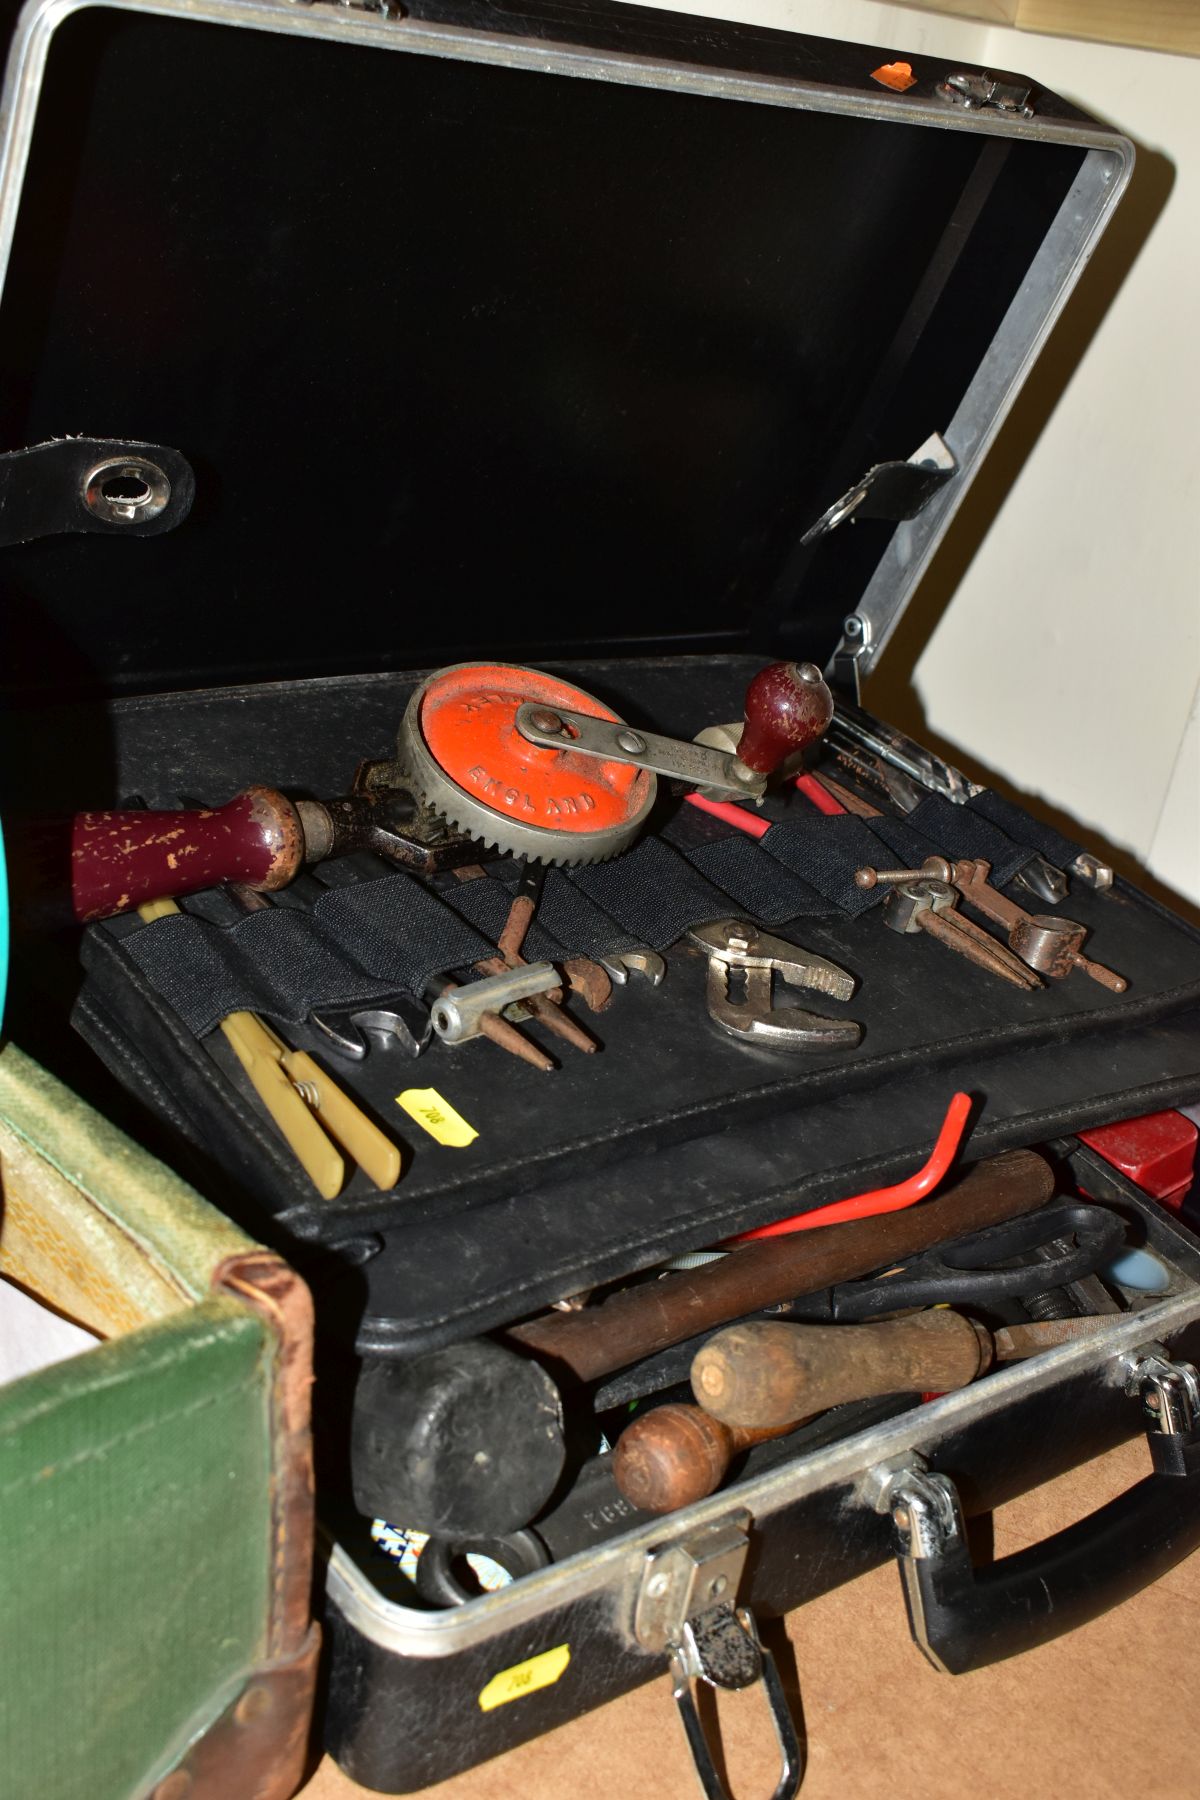 A CASE OF MISCELLANEOUS DIY TOOLS, including screwdrivers, spanners, metal cutters/tin snips, - Image 4 of 5